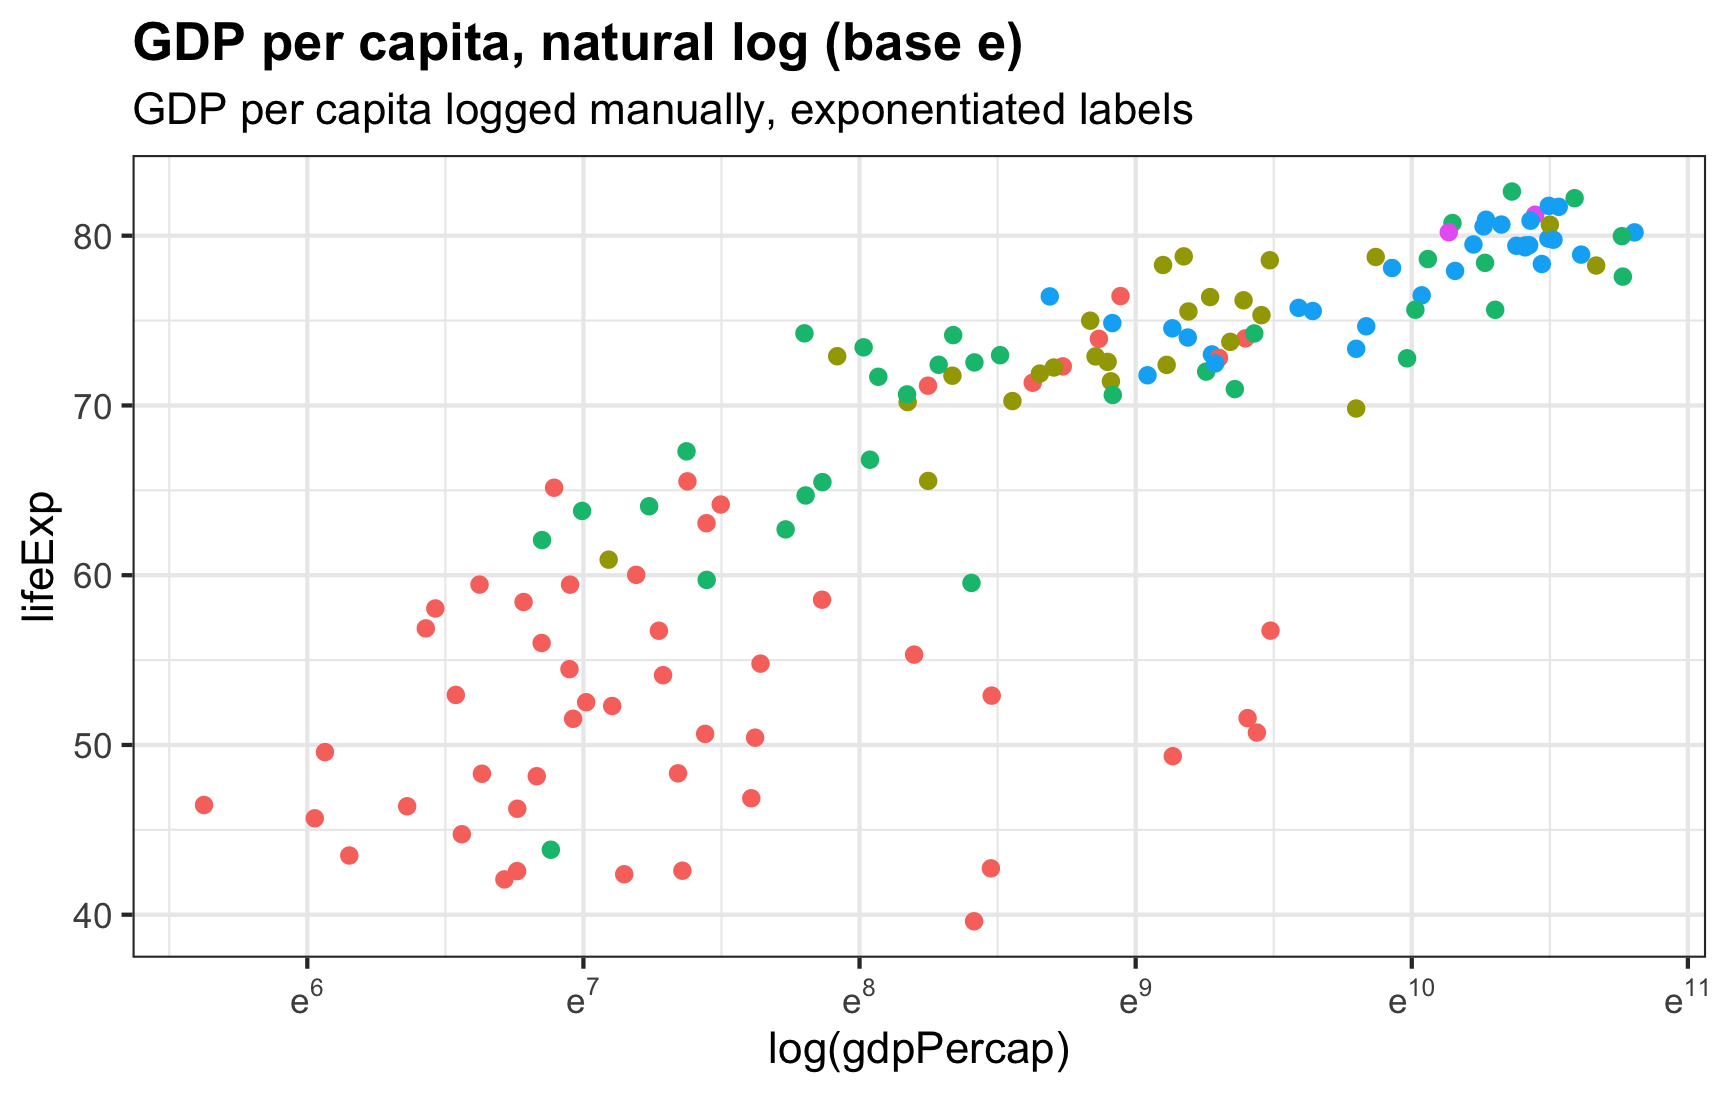 The x-axis labels show natural log values as exponents for $e$: $e^6$, $e^7$, and so on. They're still tricky to interpret, but now it shows that they're at least based on $e$ instead of being actual values like 6. The values on the x-axis were logged before being fed to ggplot.